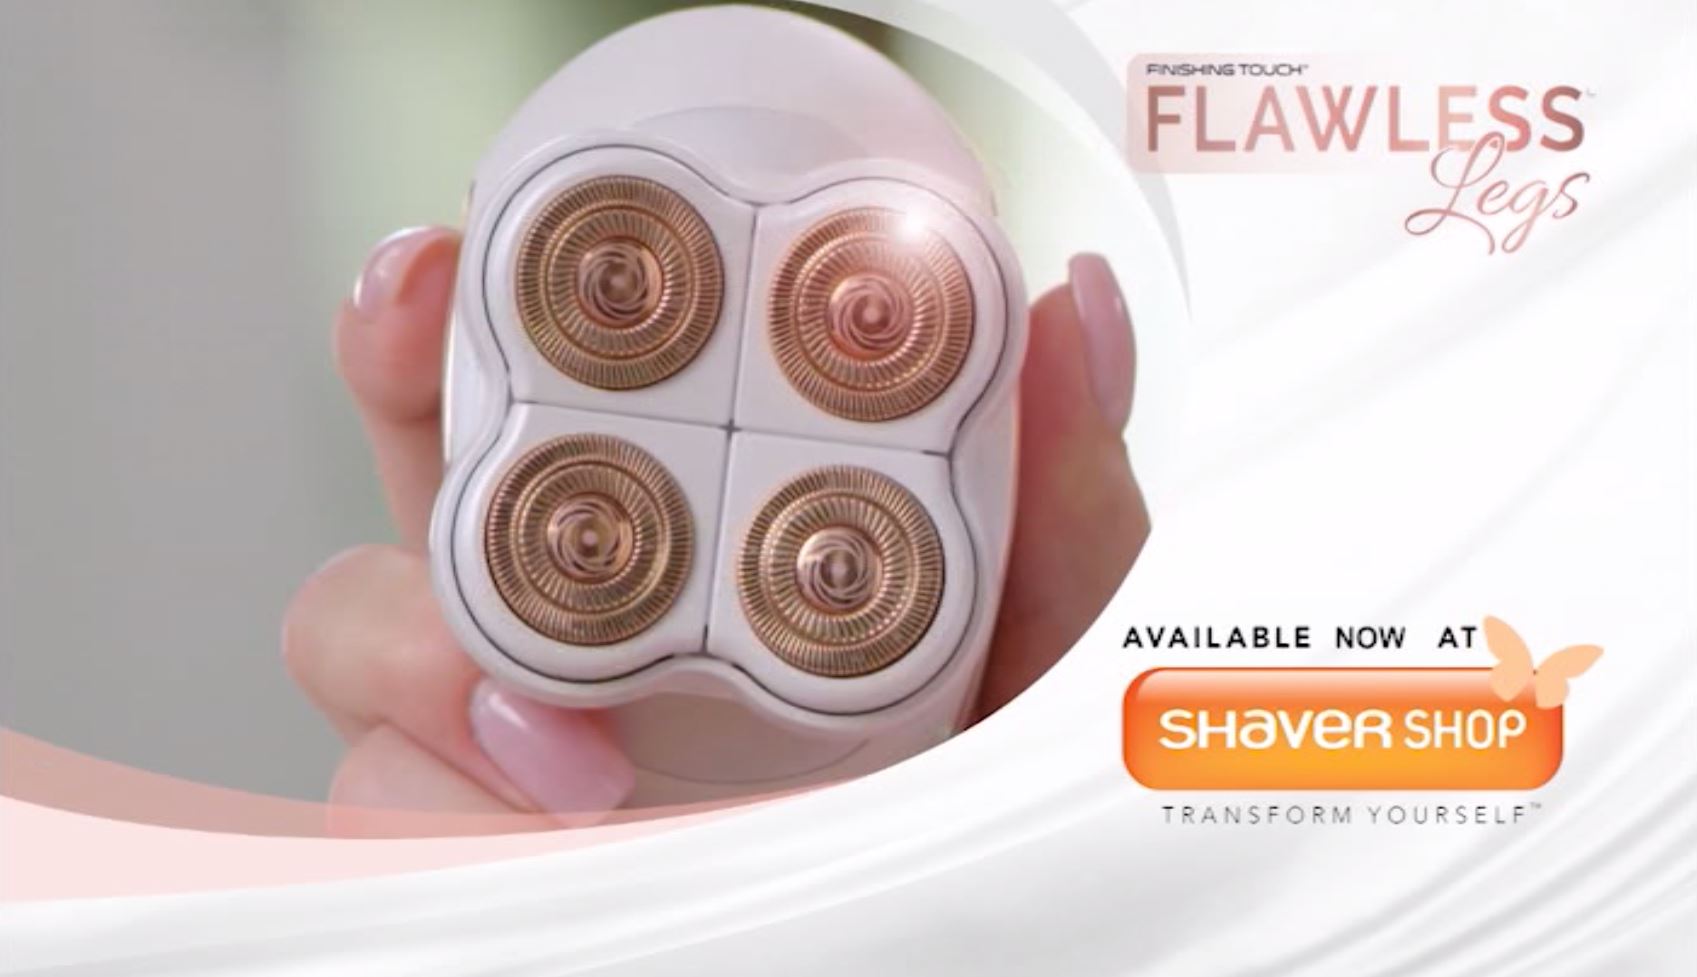 Finishing Touch Flawless, Legs Hair Remover Electric Shaver